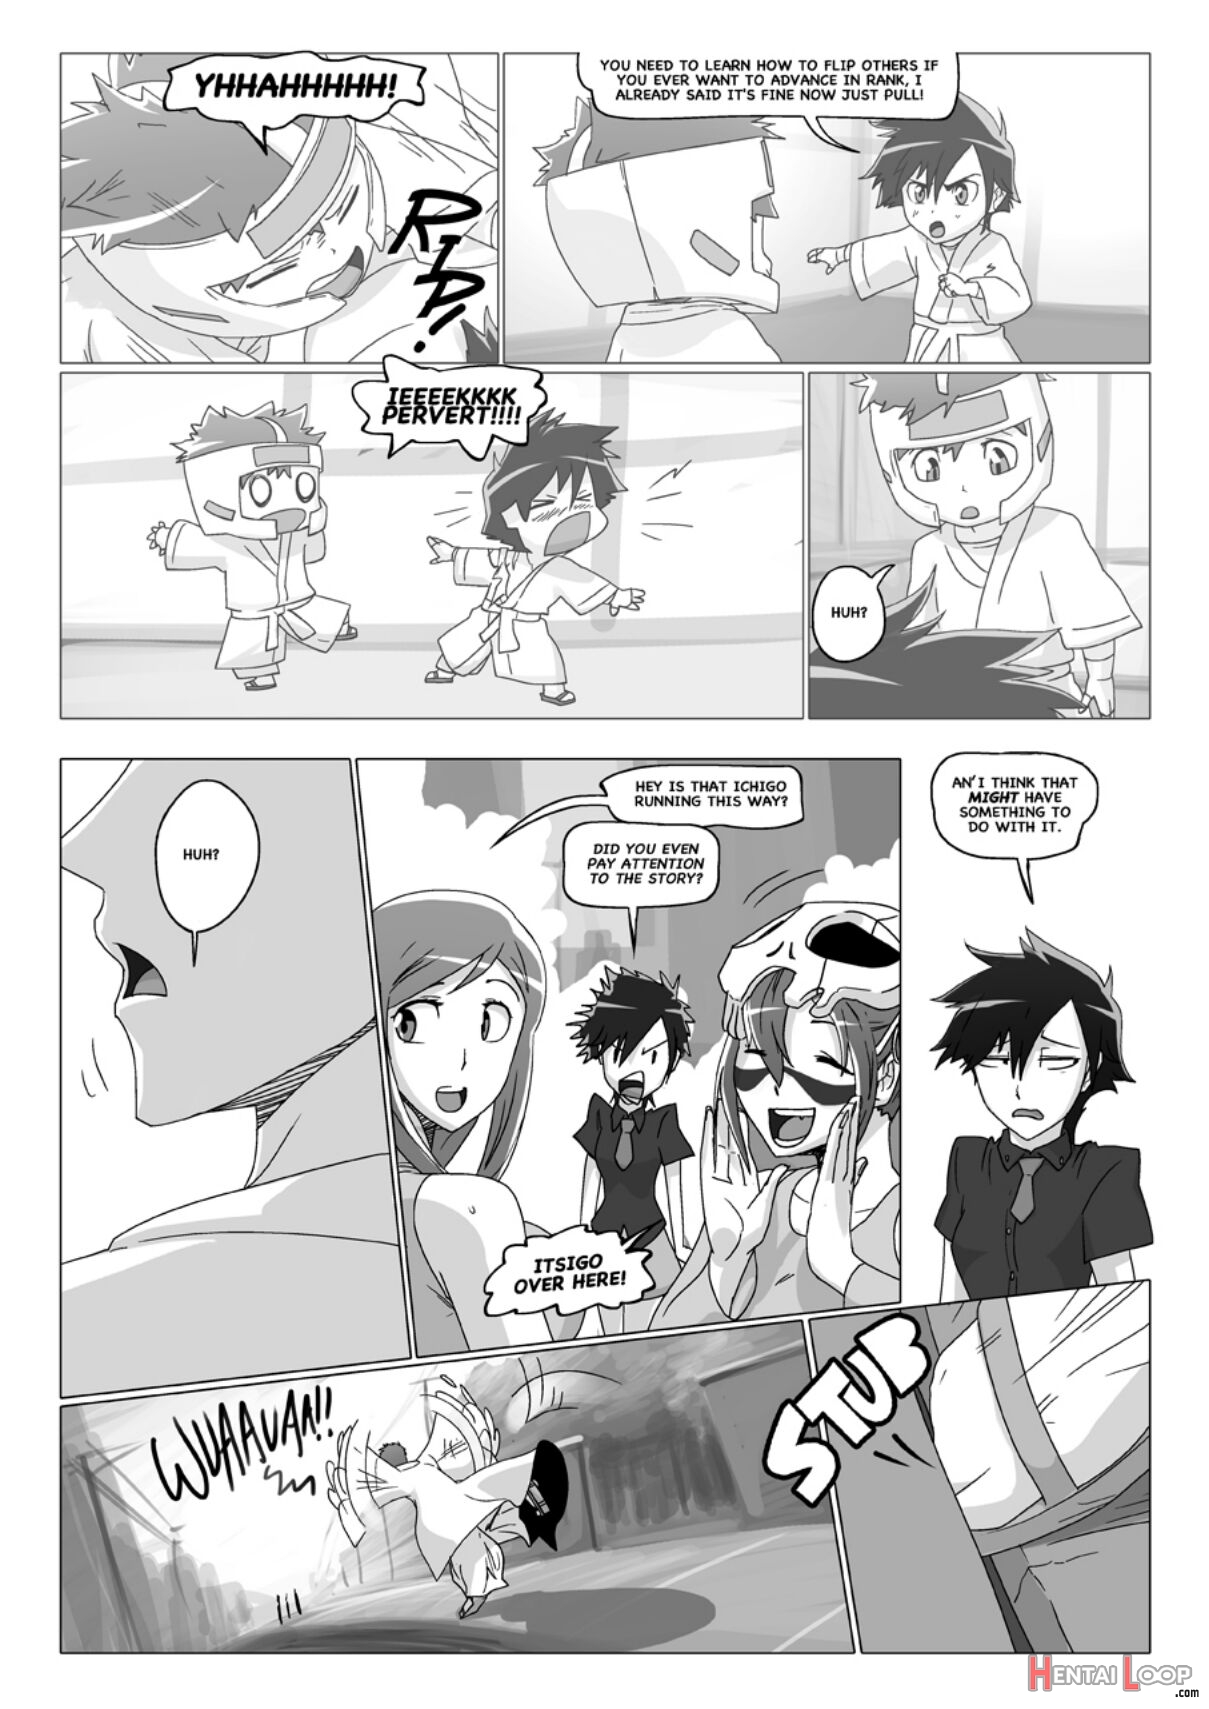 Happy To Serve You - Xxx Version page 267